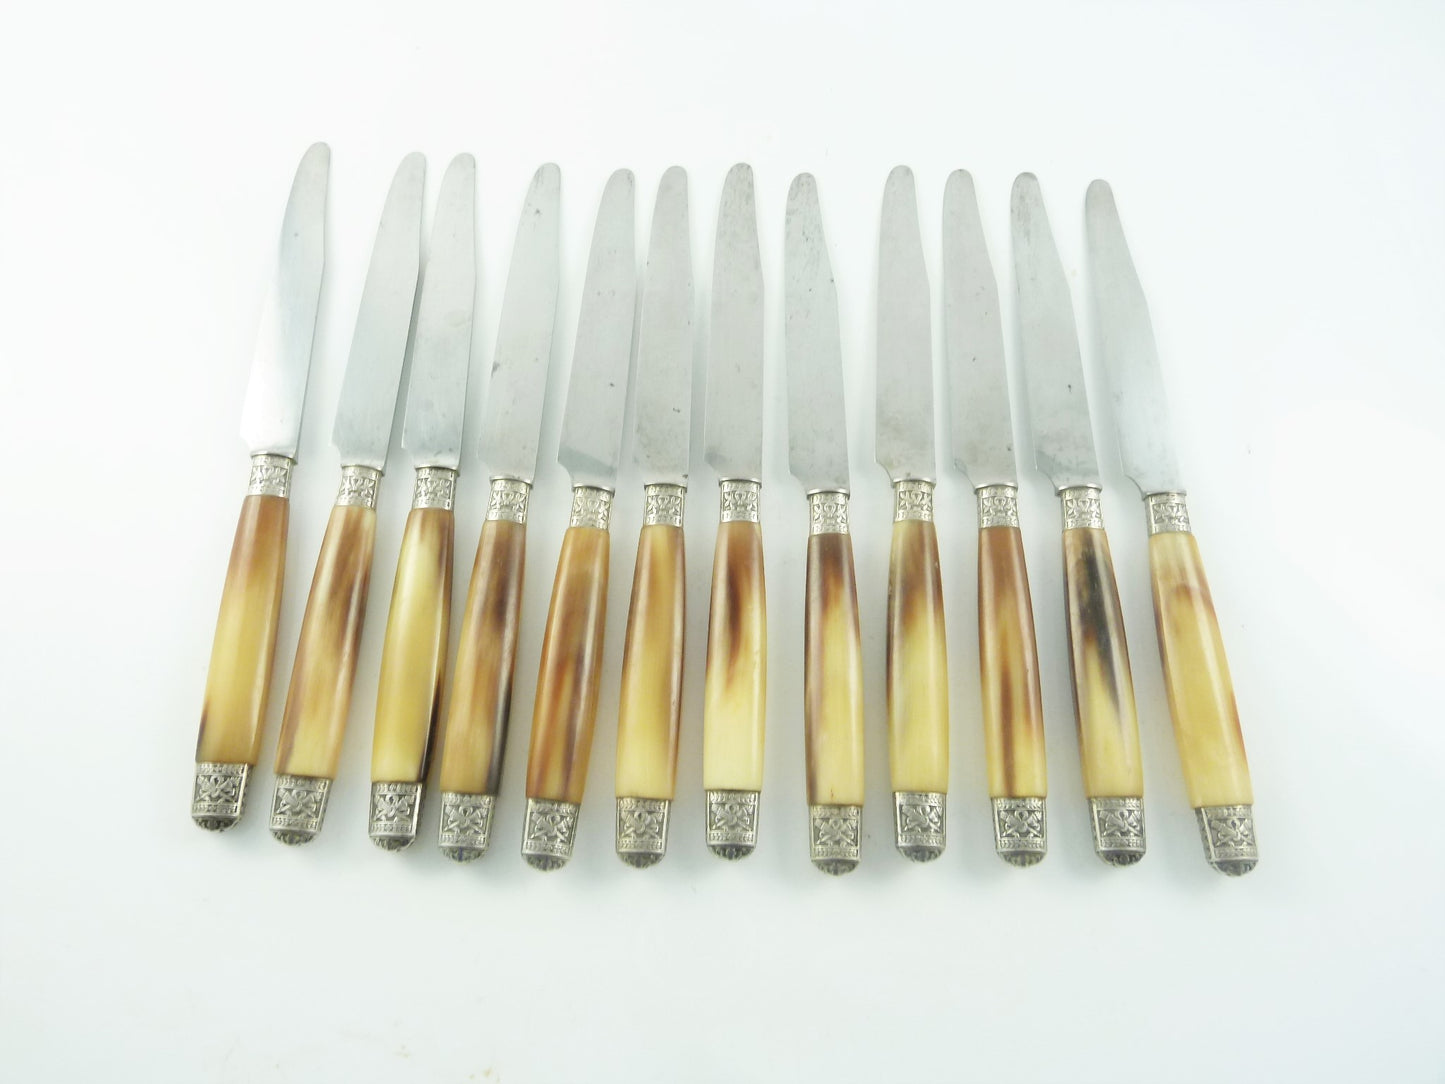 Set of 12 French silver & horn knives - 43 Chesapeake Court Antiques